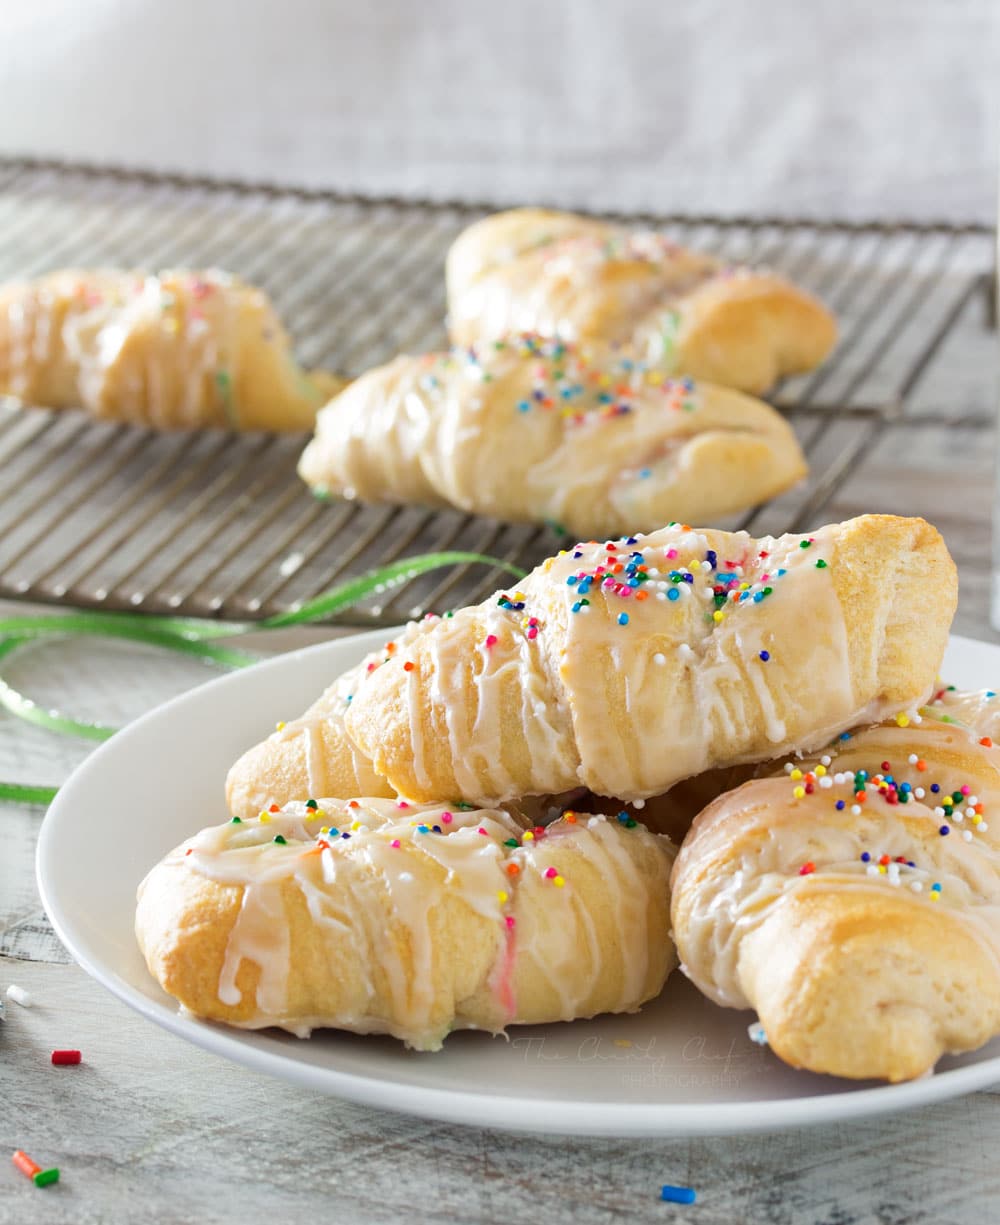 Funfetti-Cheesecake-Stuffed-Crescent-Rolls - Buttery crescent rolls are filled with an easy funfetti cheesecake spread, baked until golden, and drizzled with a vanilla glaze!! Perfect for kids! | http://thechunkychef.com